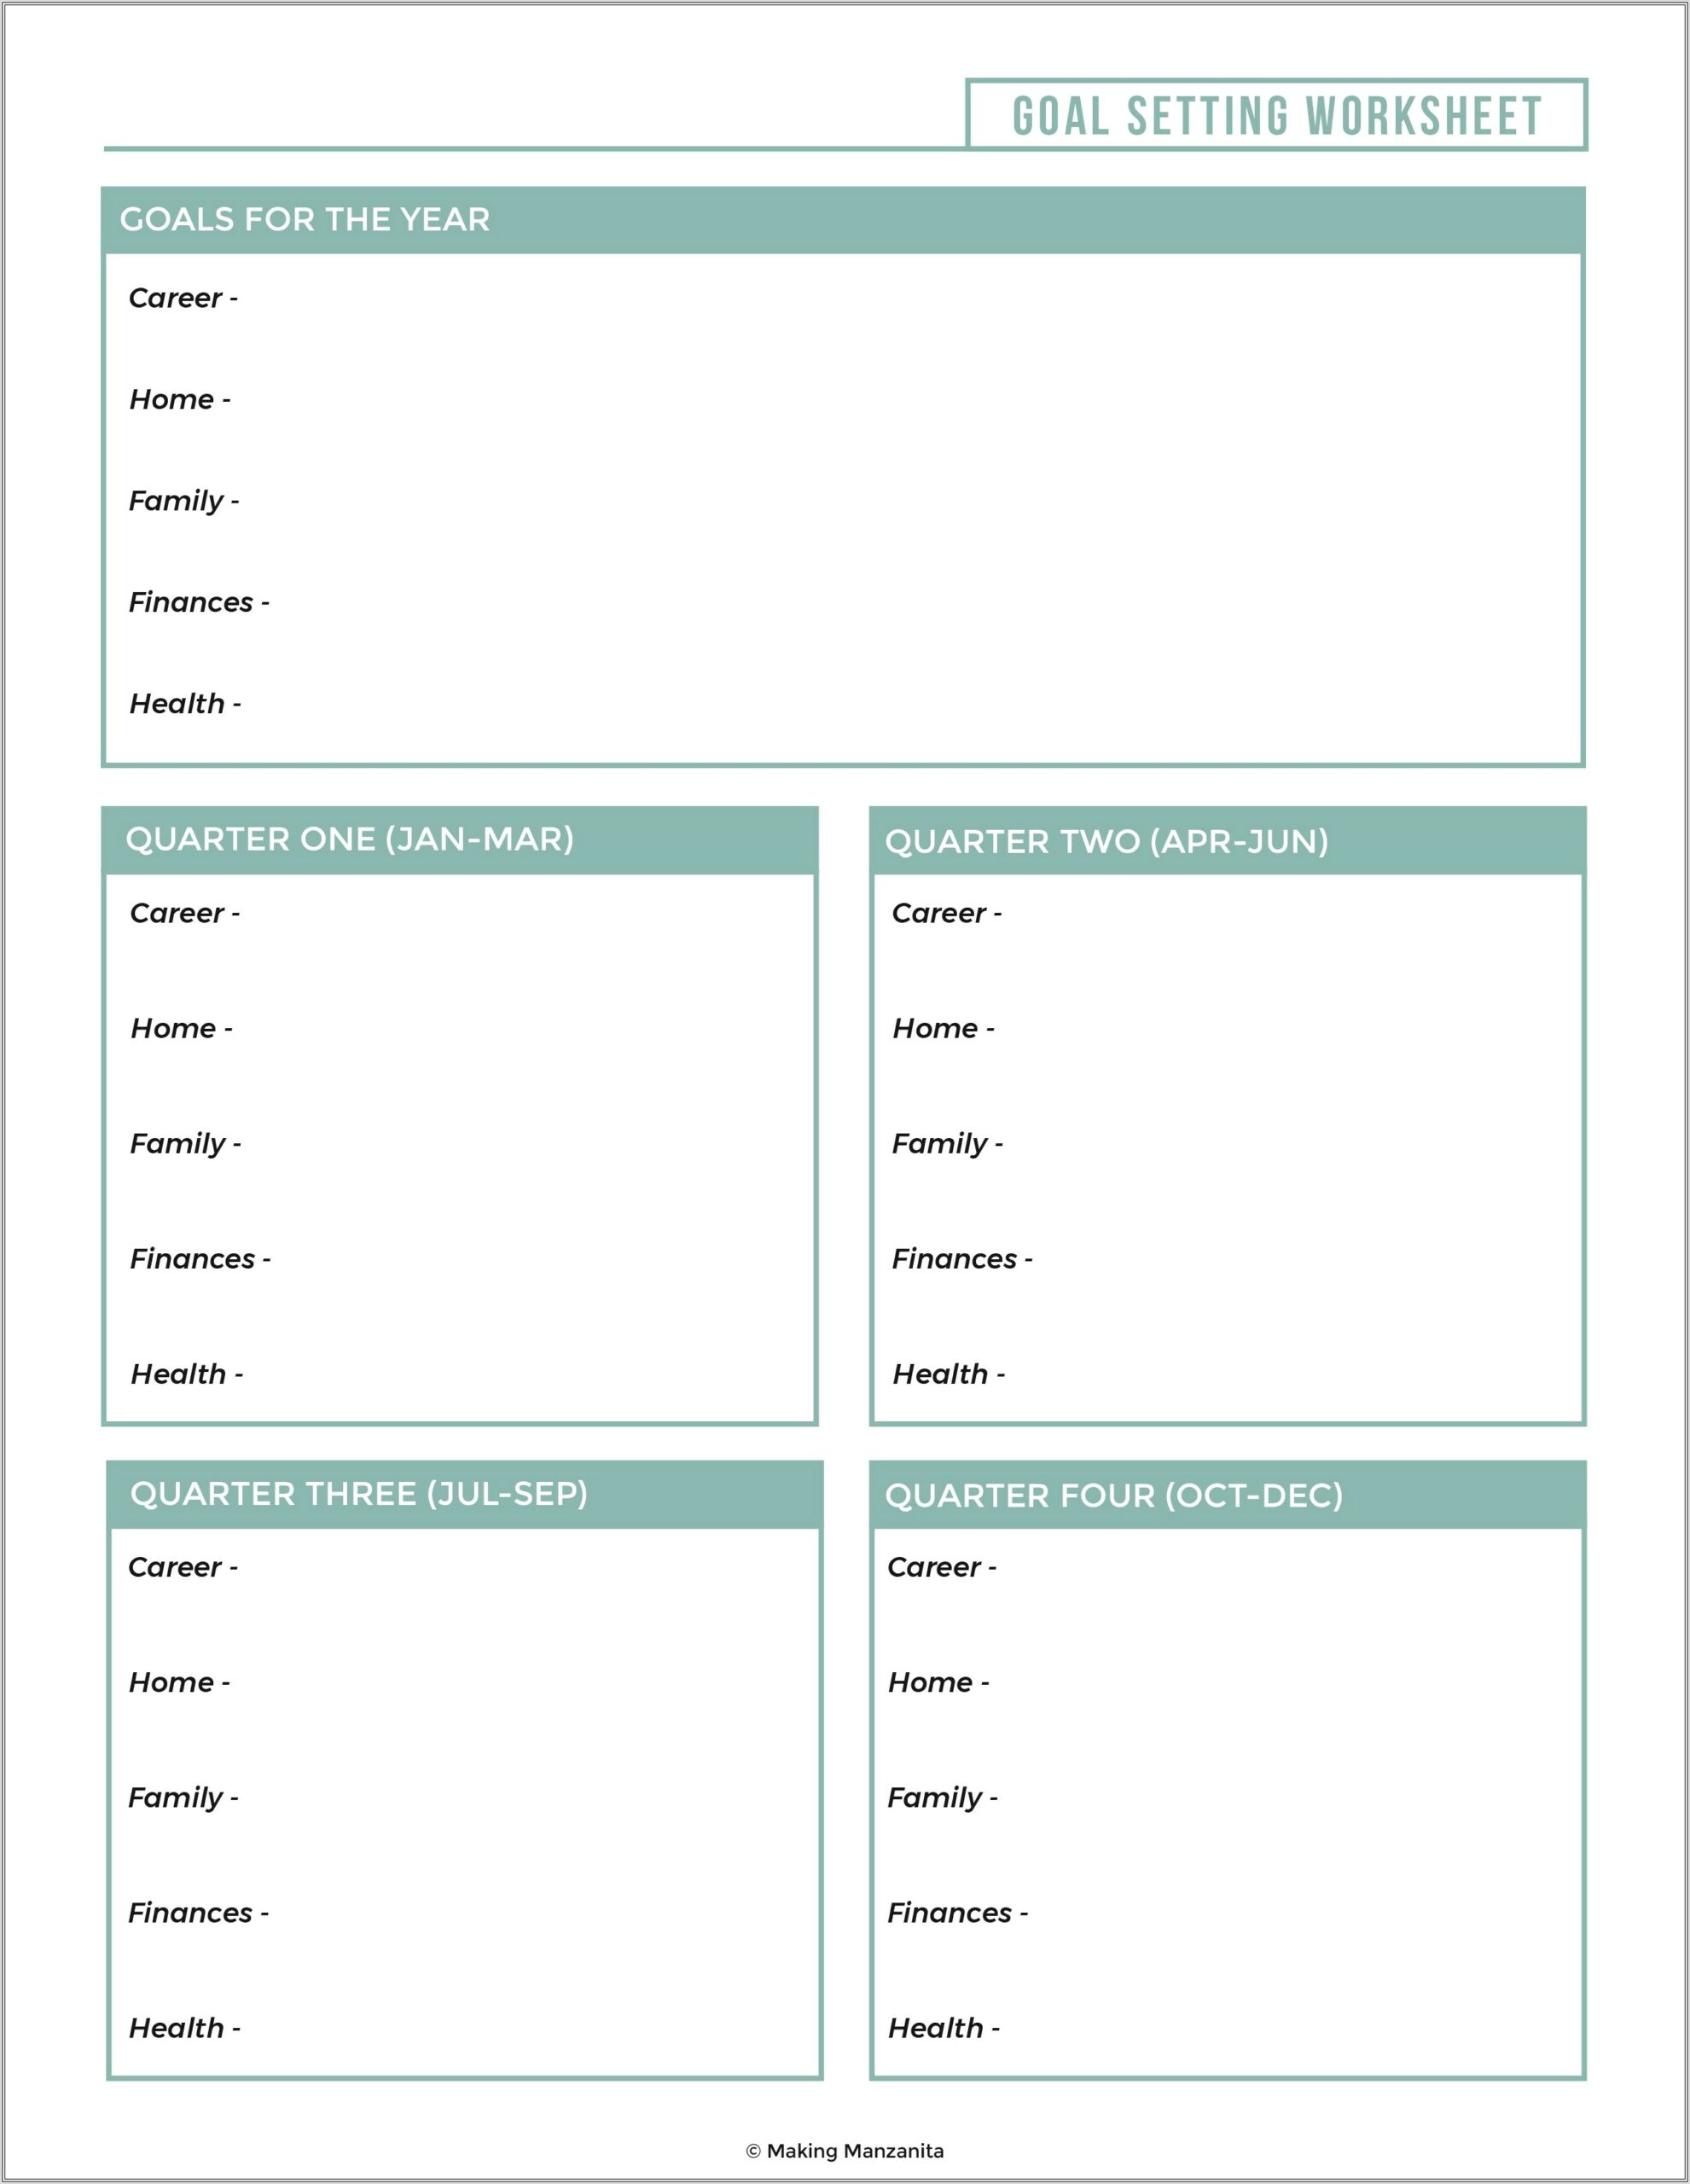 Goal Setting Worksheet For College Students